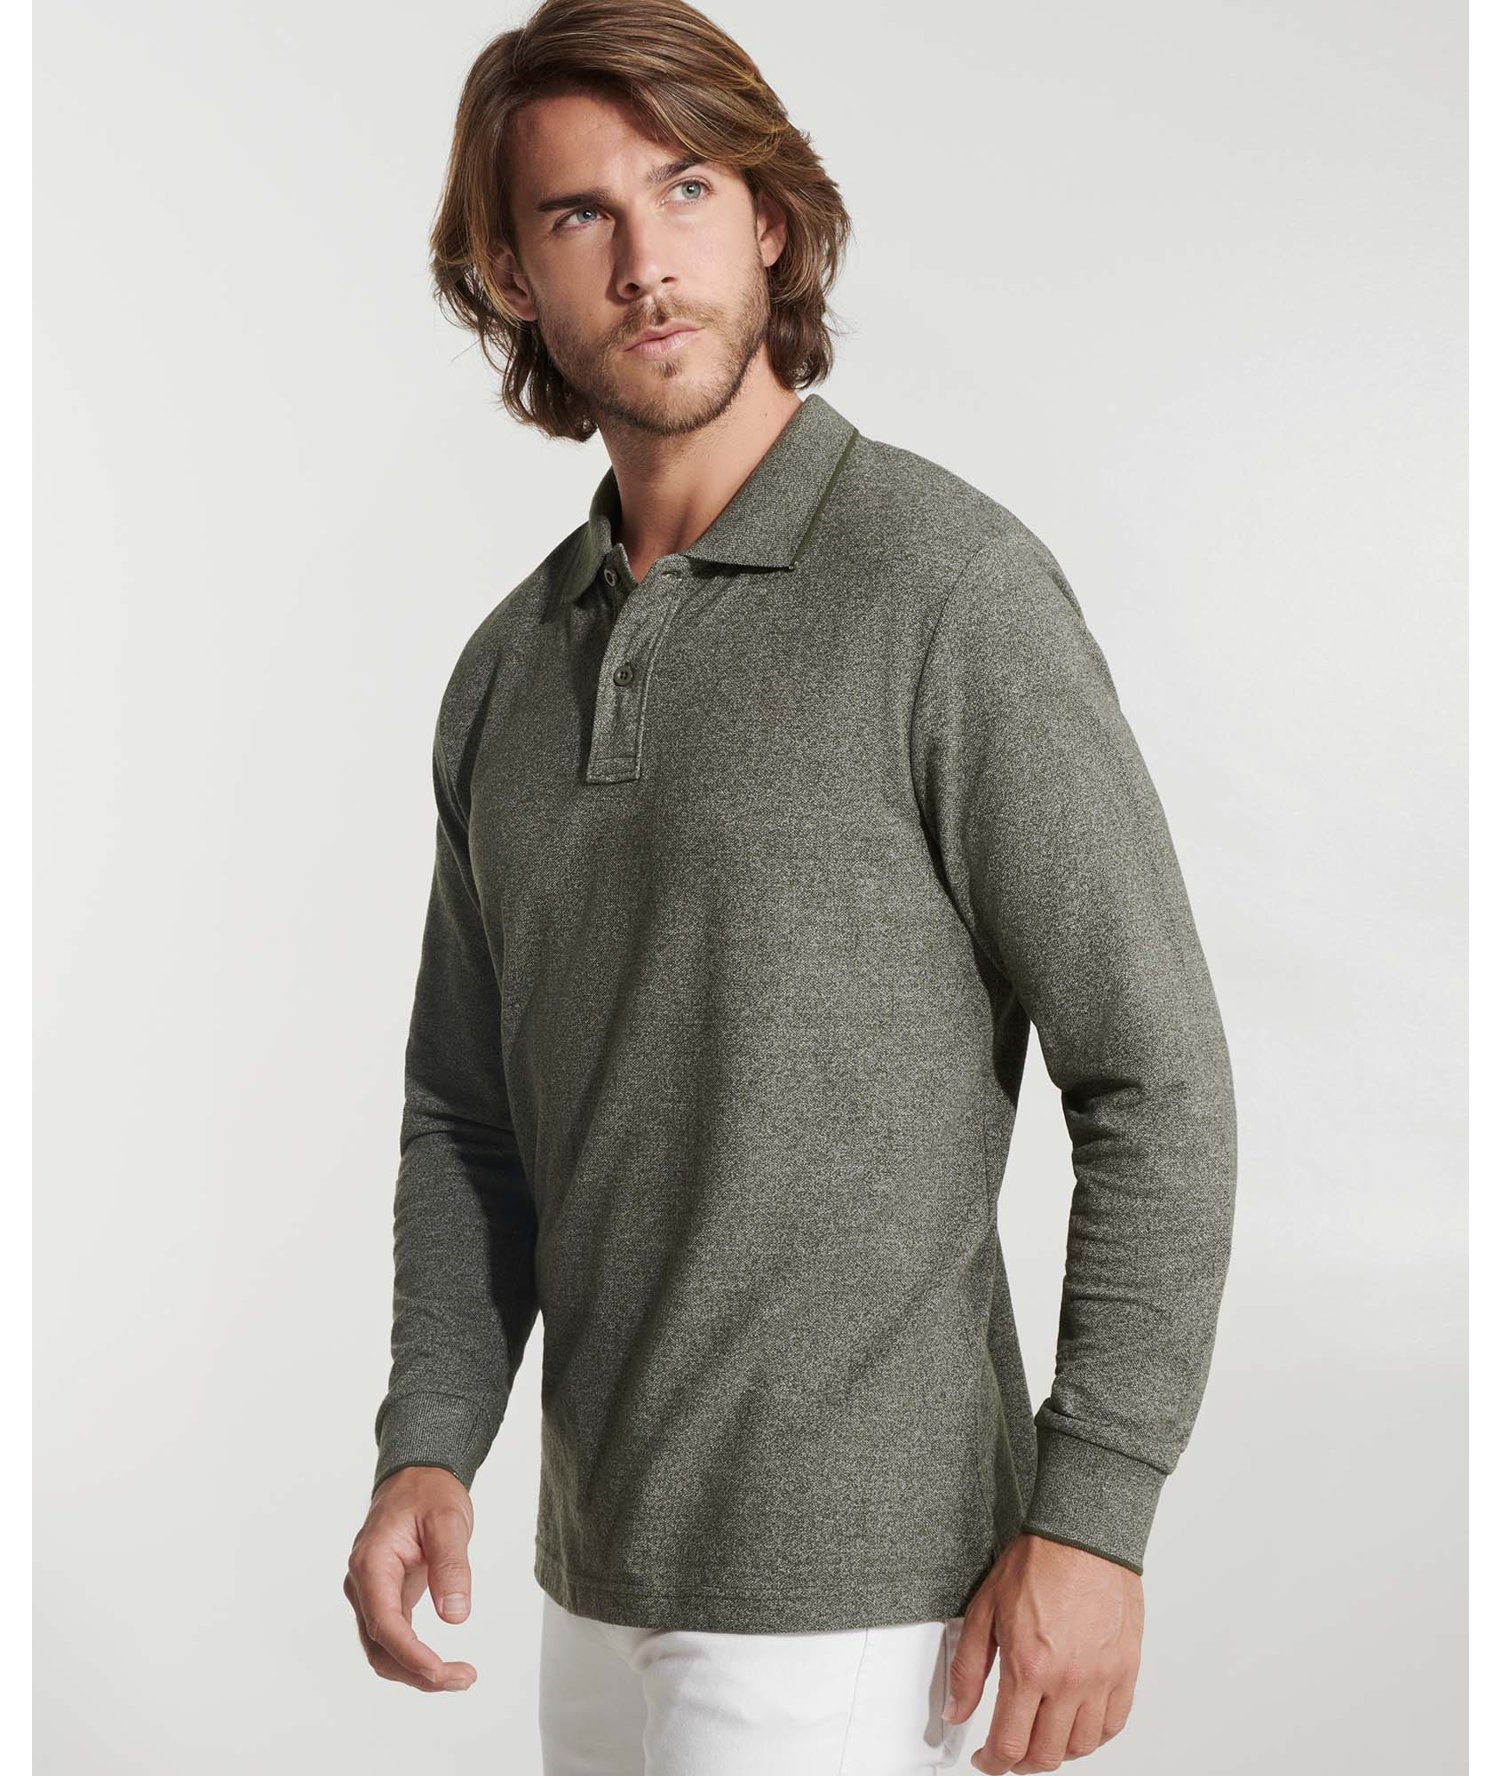 POLO SHIRT ROLY DYLAN LONG SLEEVE